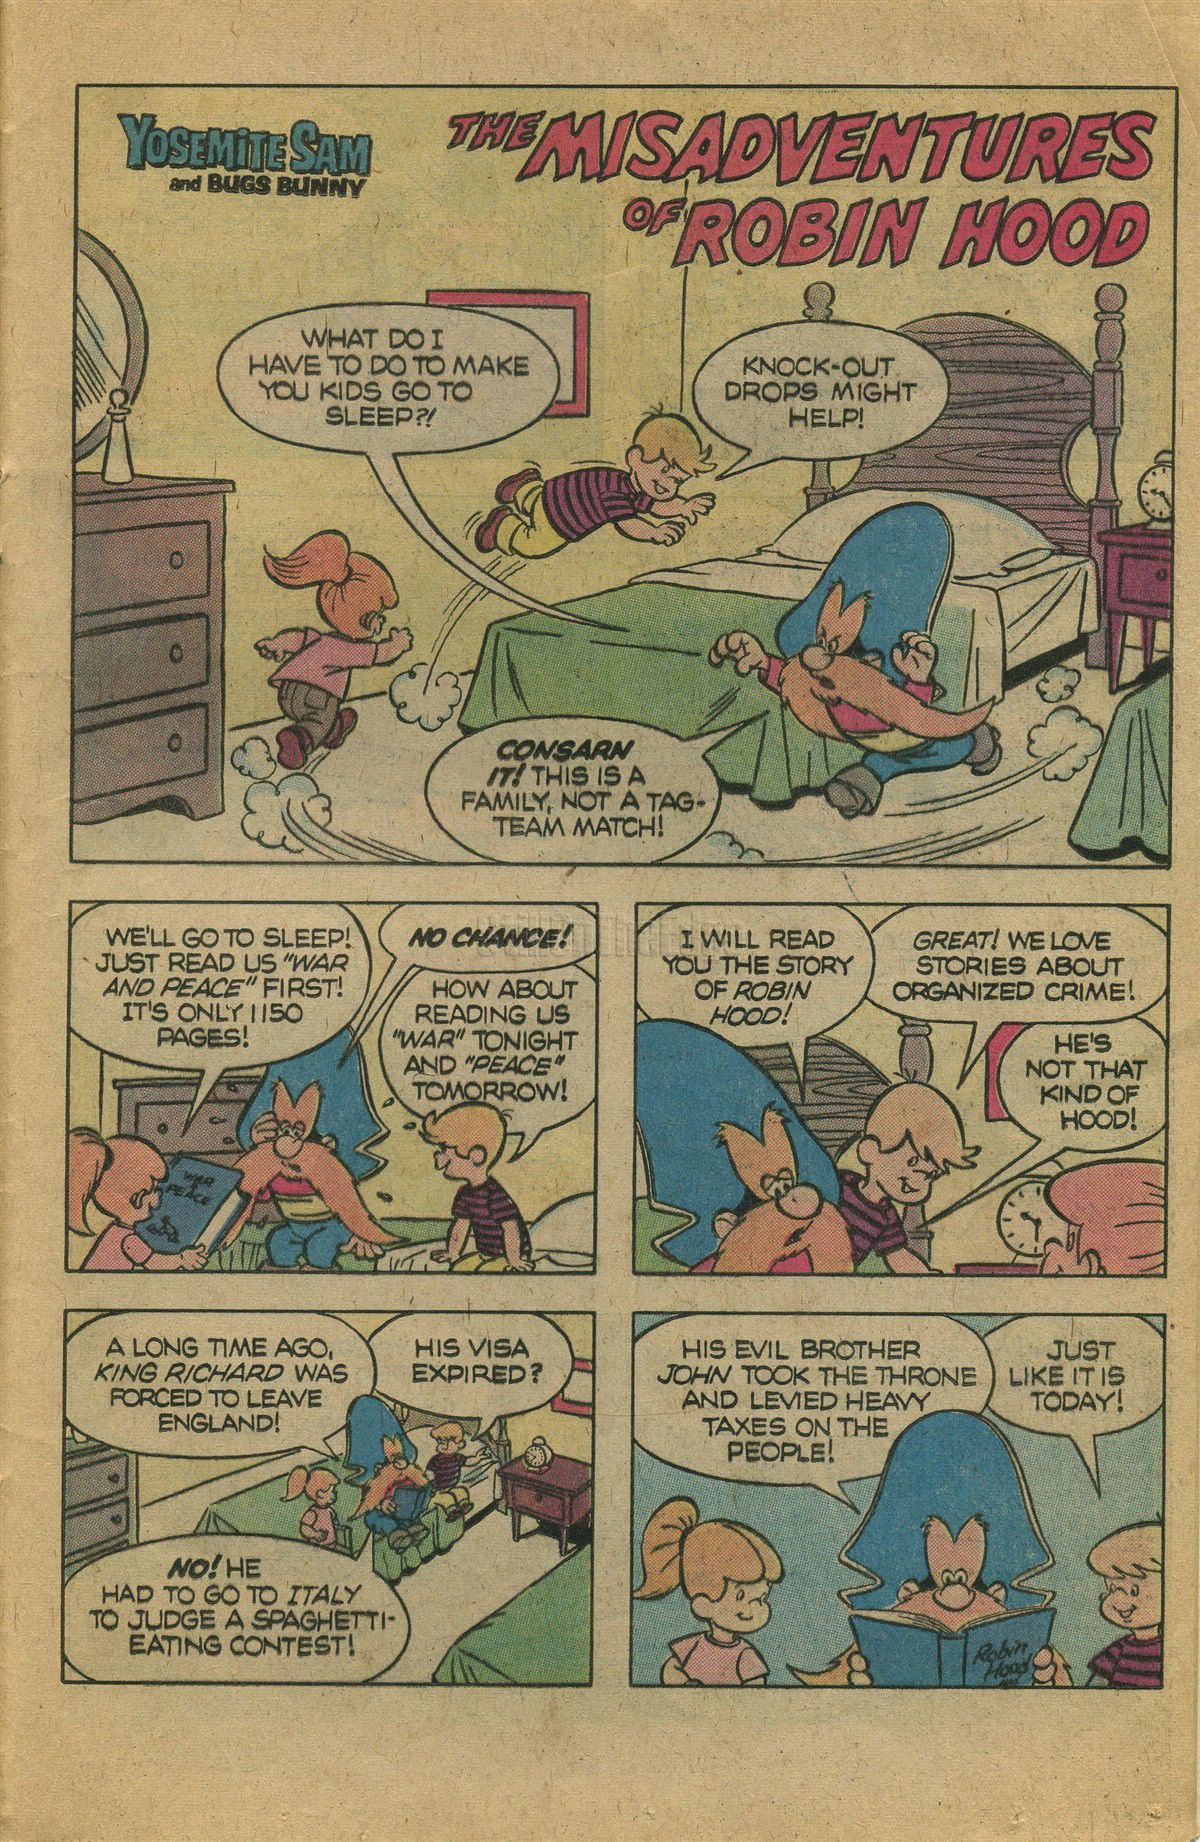 Read online Yosemite Sam and Bugs Bunny comic -  Issue #60 - 25